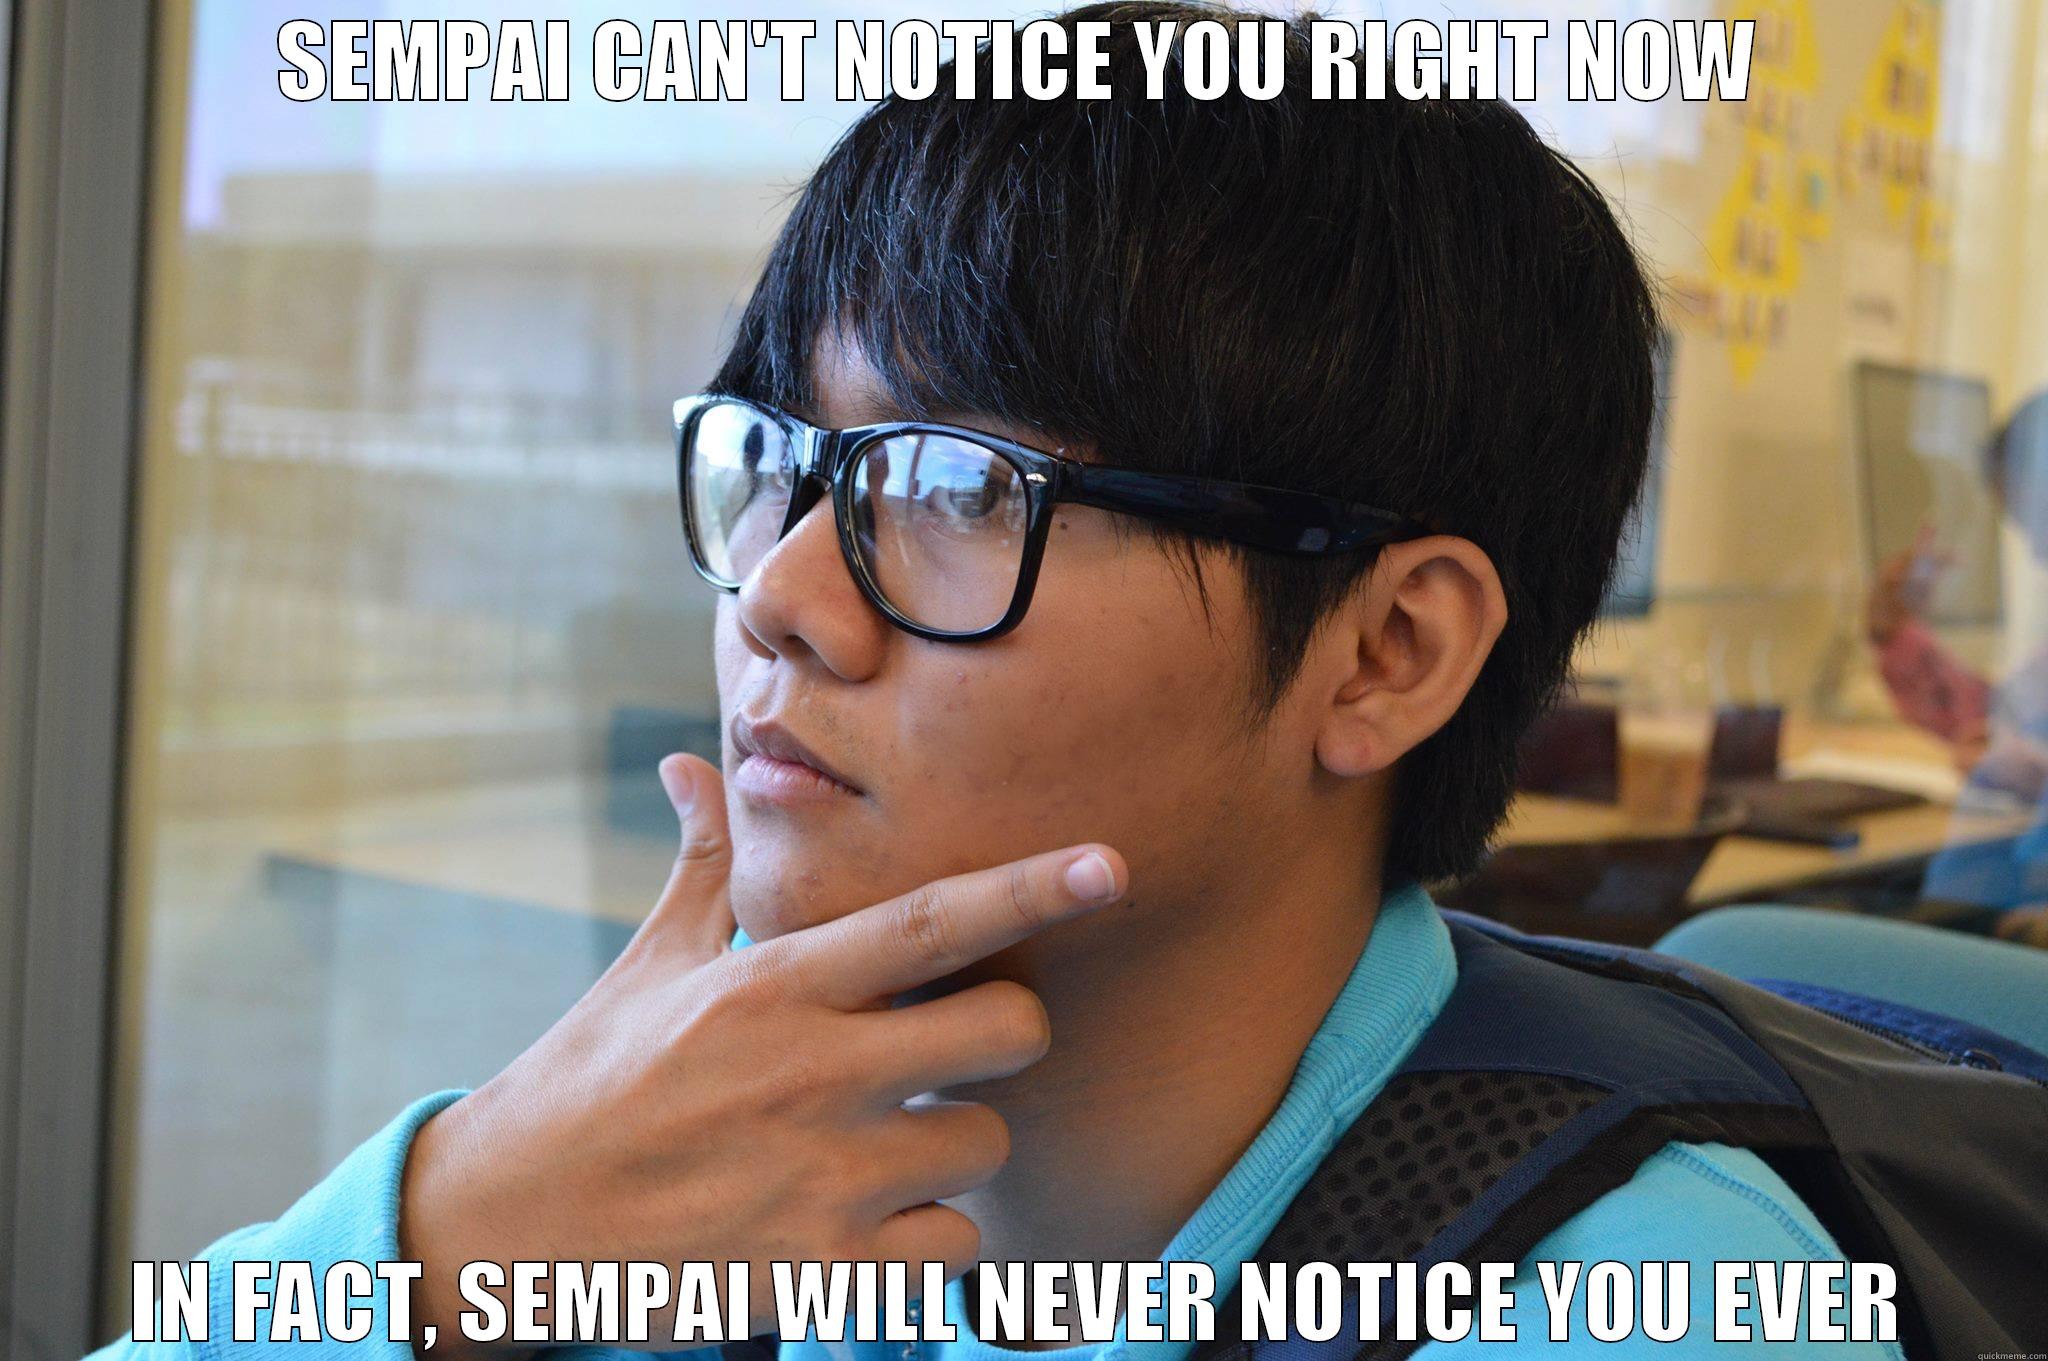 S-SEMPAI NOTICE ME ! - SEMPAI CAN'T NOTICE YOU RIGHT NOW IN FACT, SEMPAI WILL NEVER NOTICE YOU EVER Misc